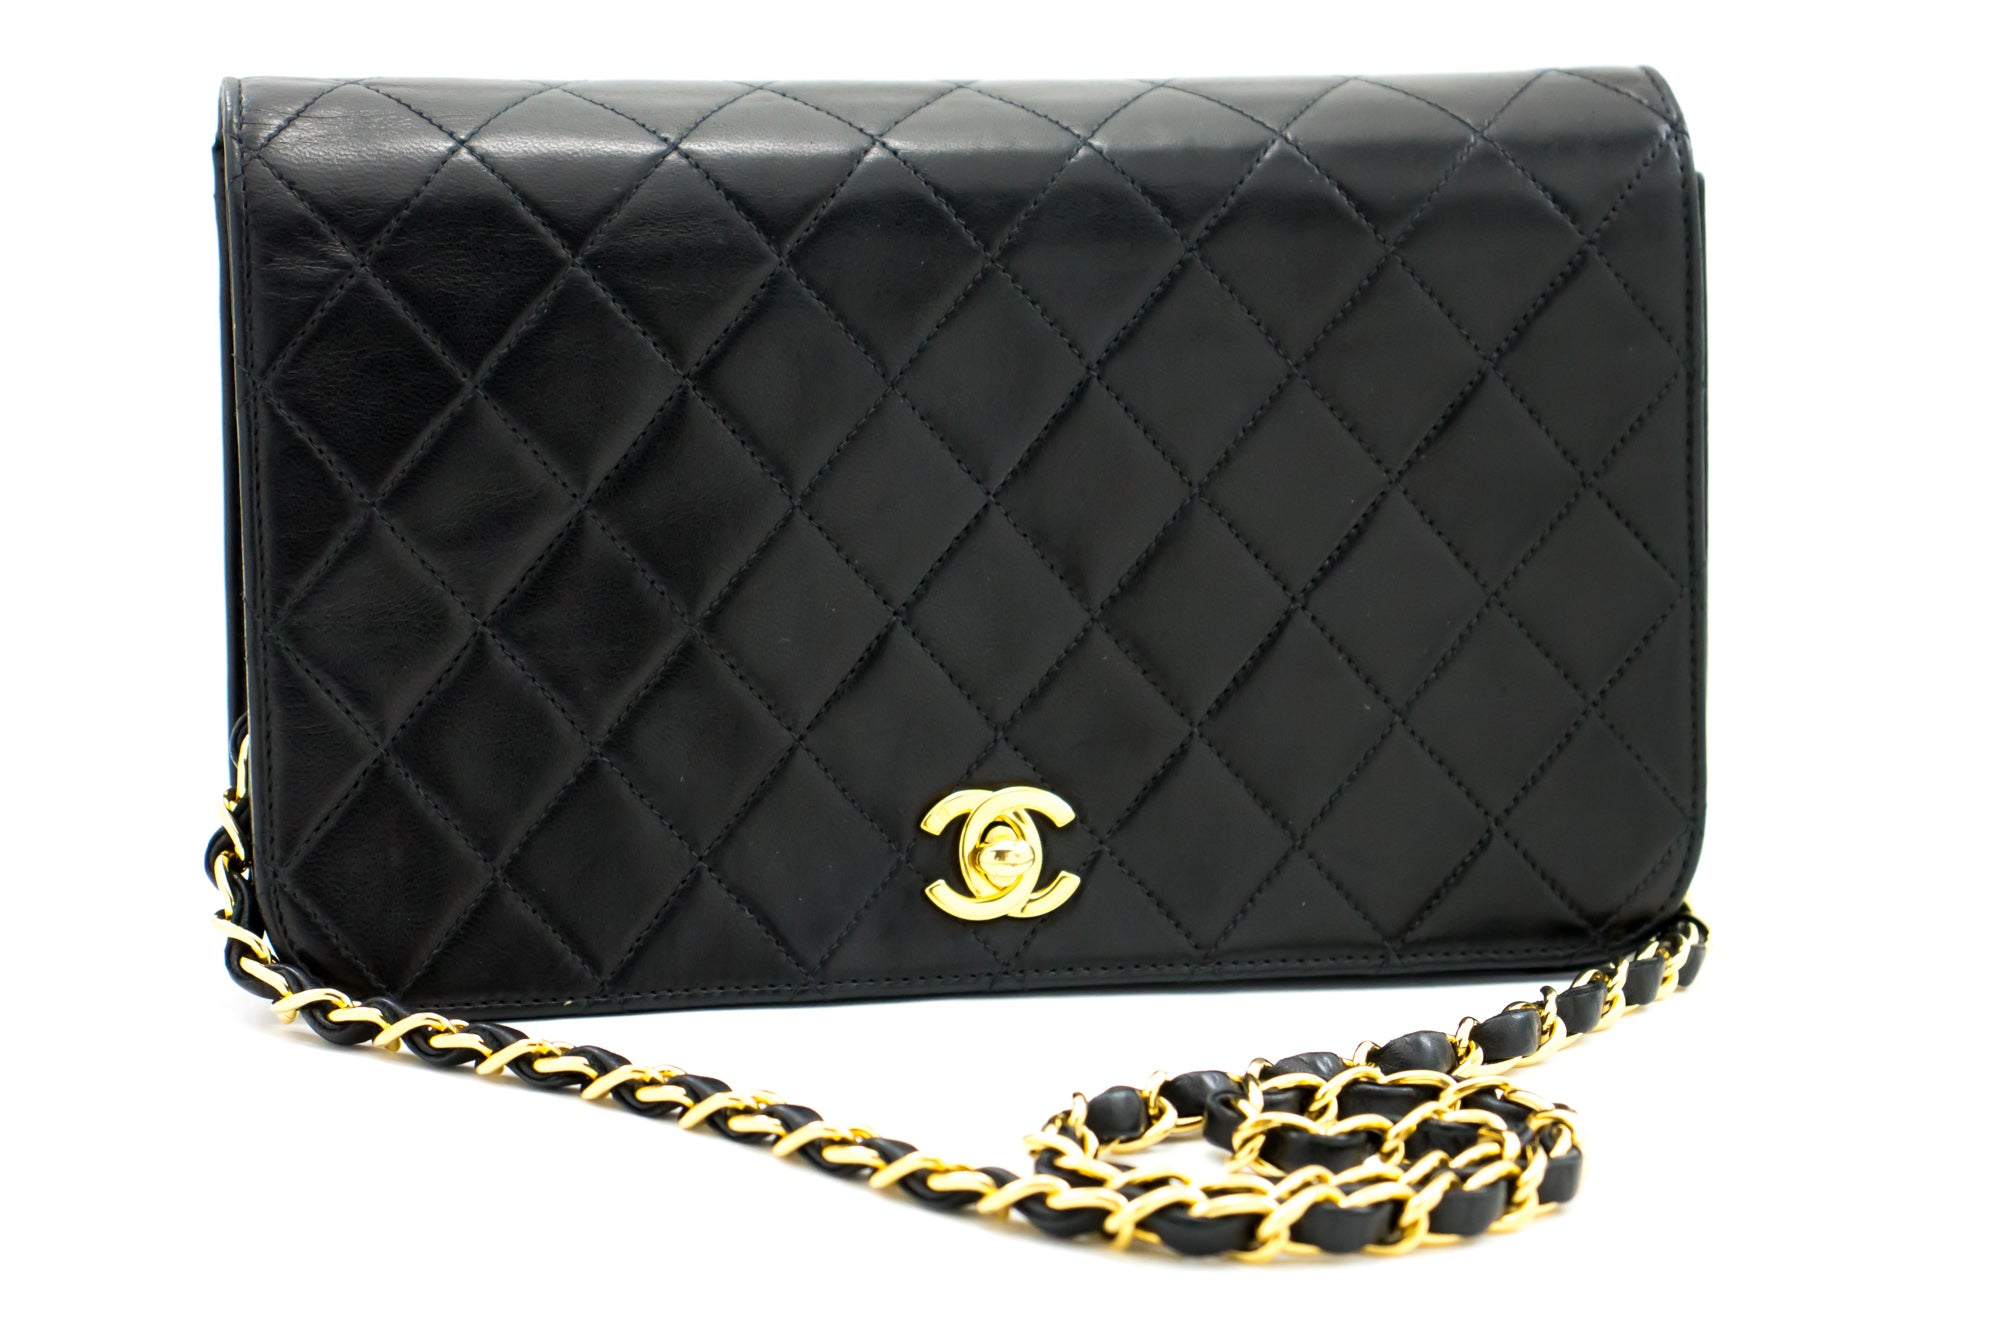 CHANEL Full Flap Chain Shoulder Bag Black Quilted Lambskin Leather h46 –  hannari-shop